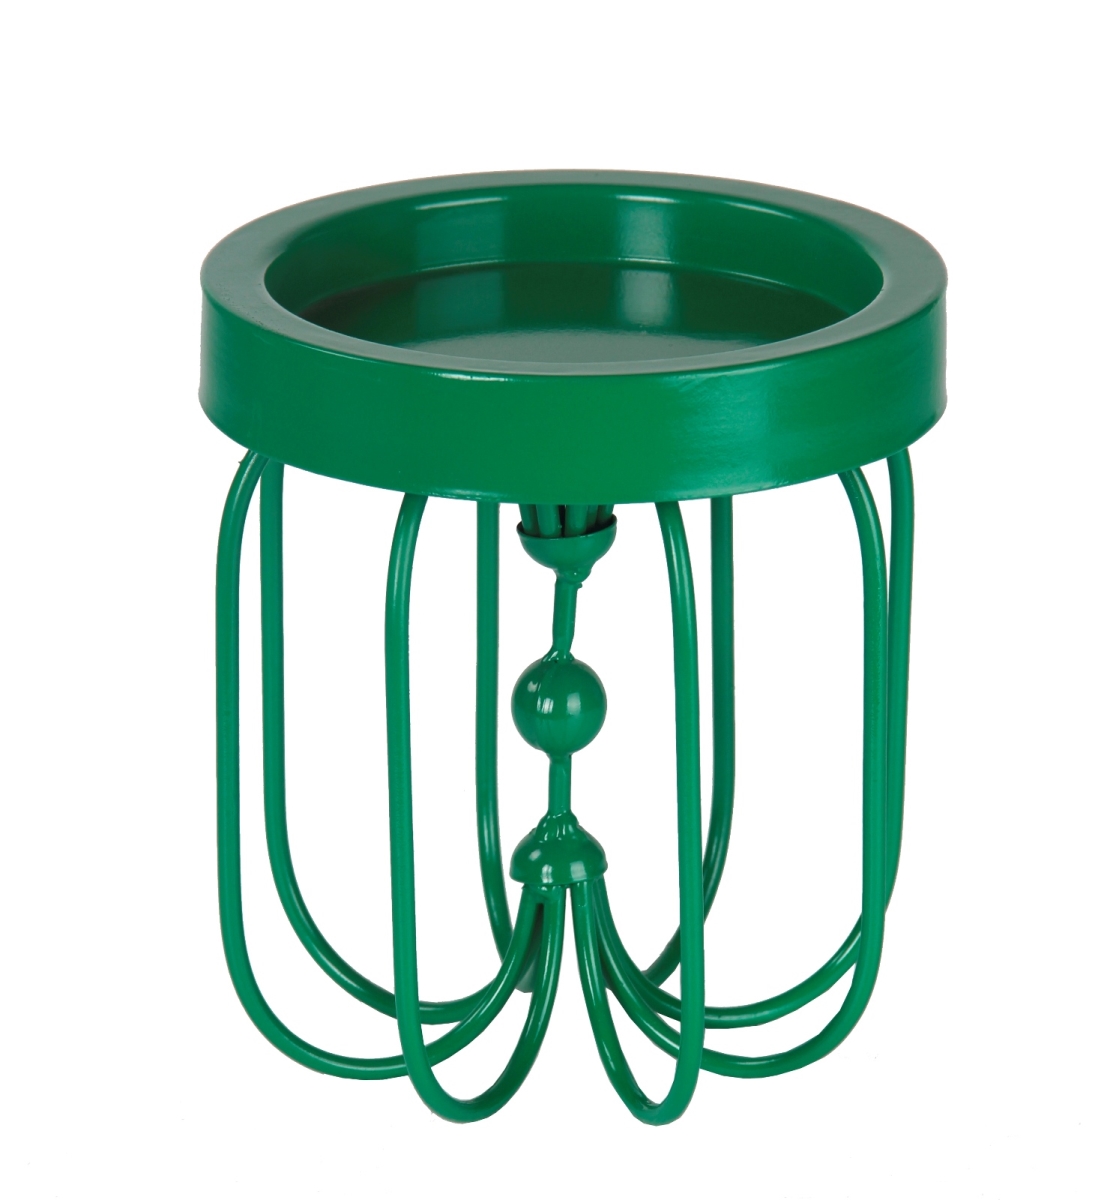 18779 Small Iron Candle Holder - Green